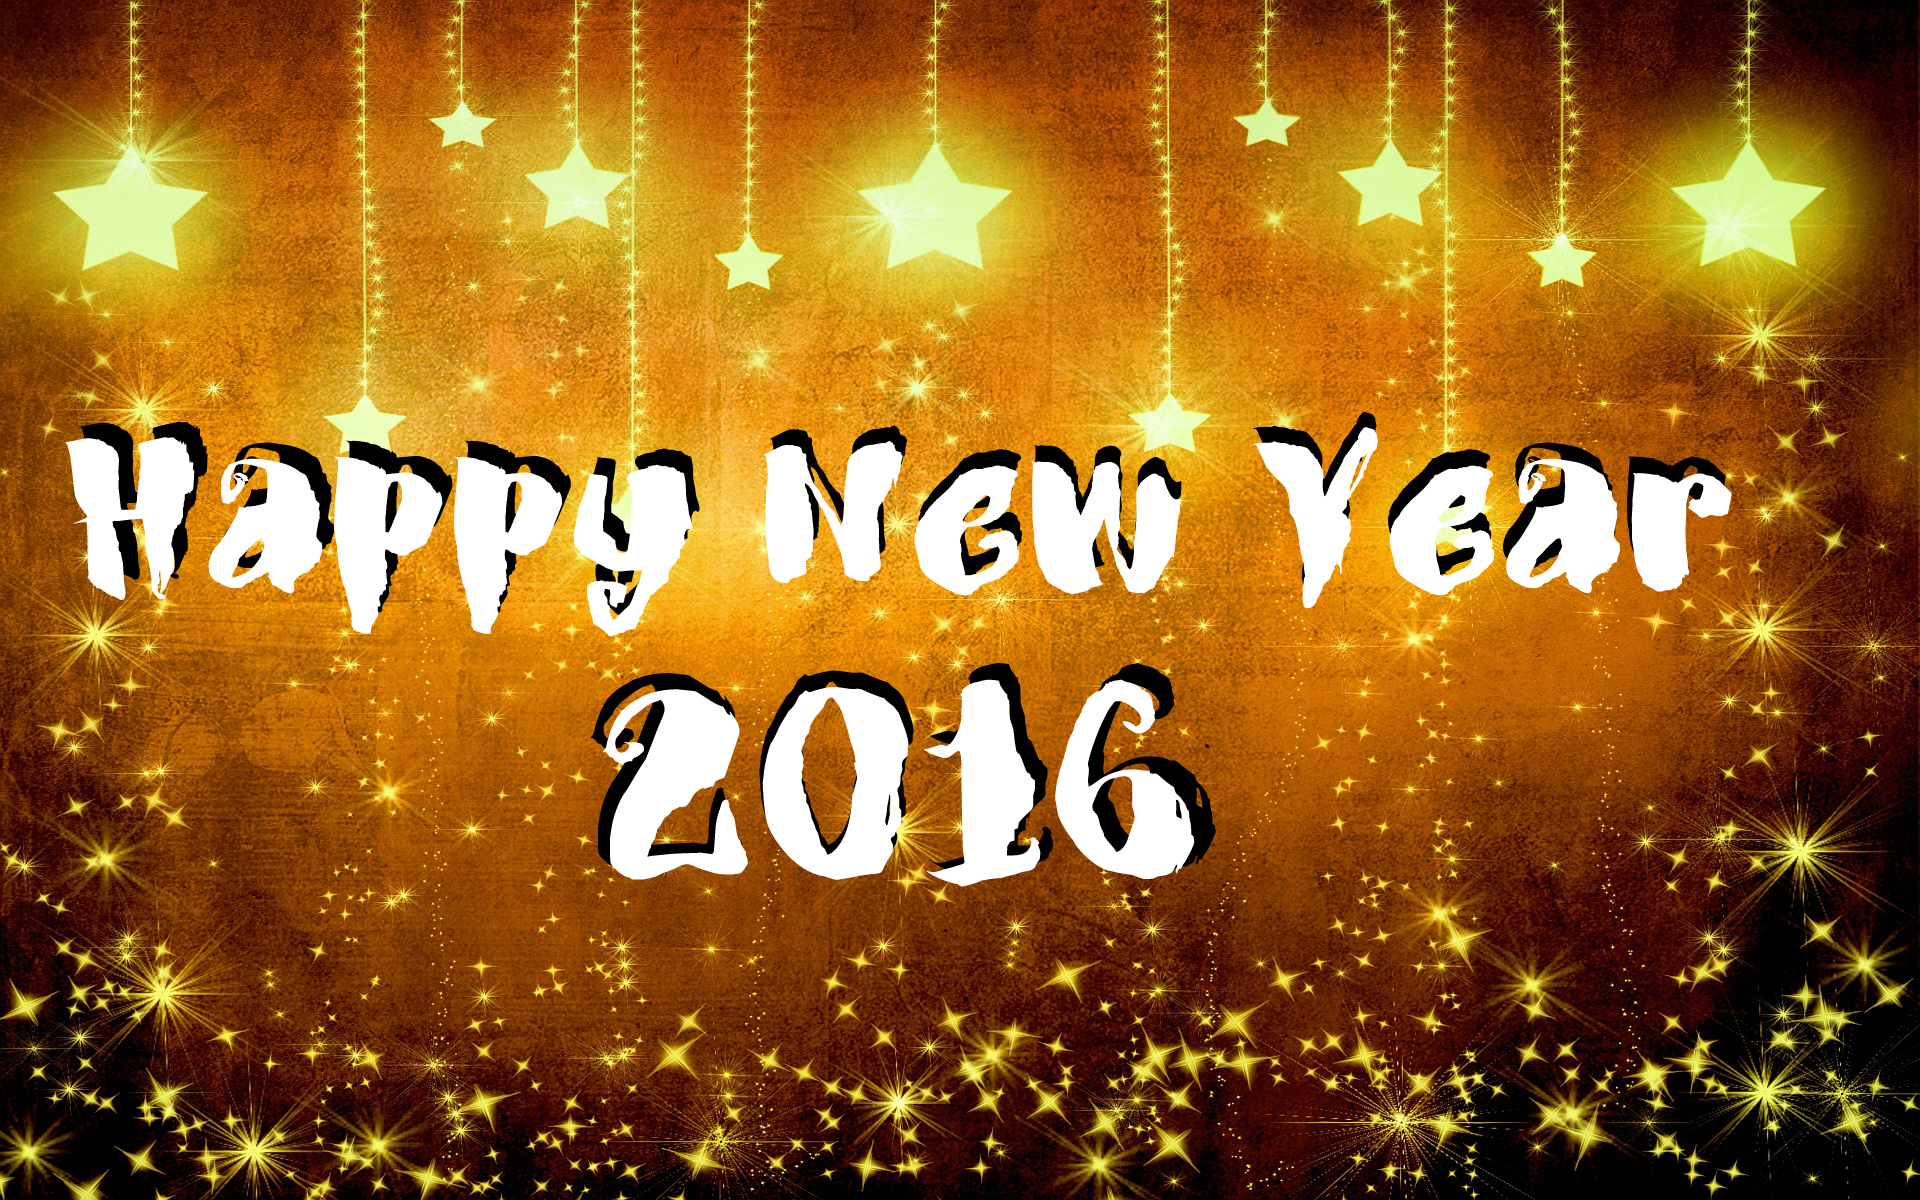 Happy-New-Year-2016-Images-5